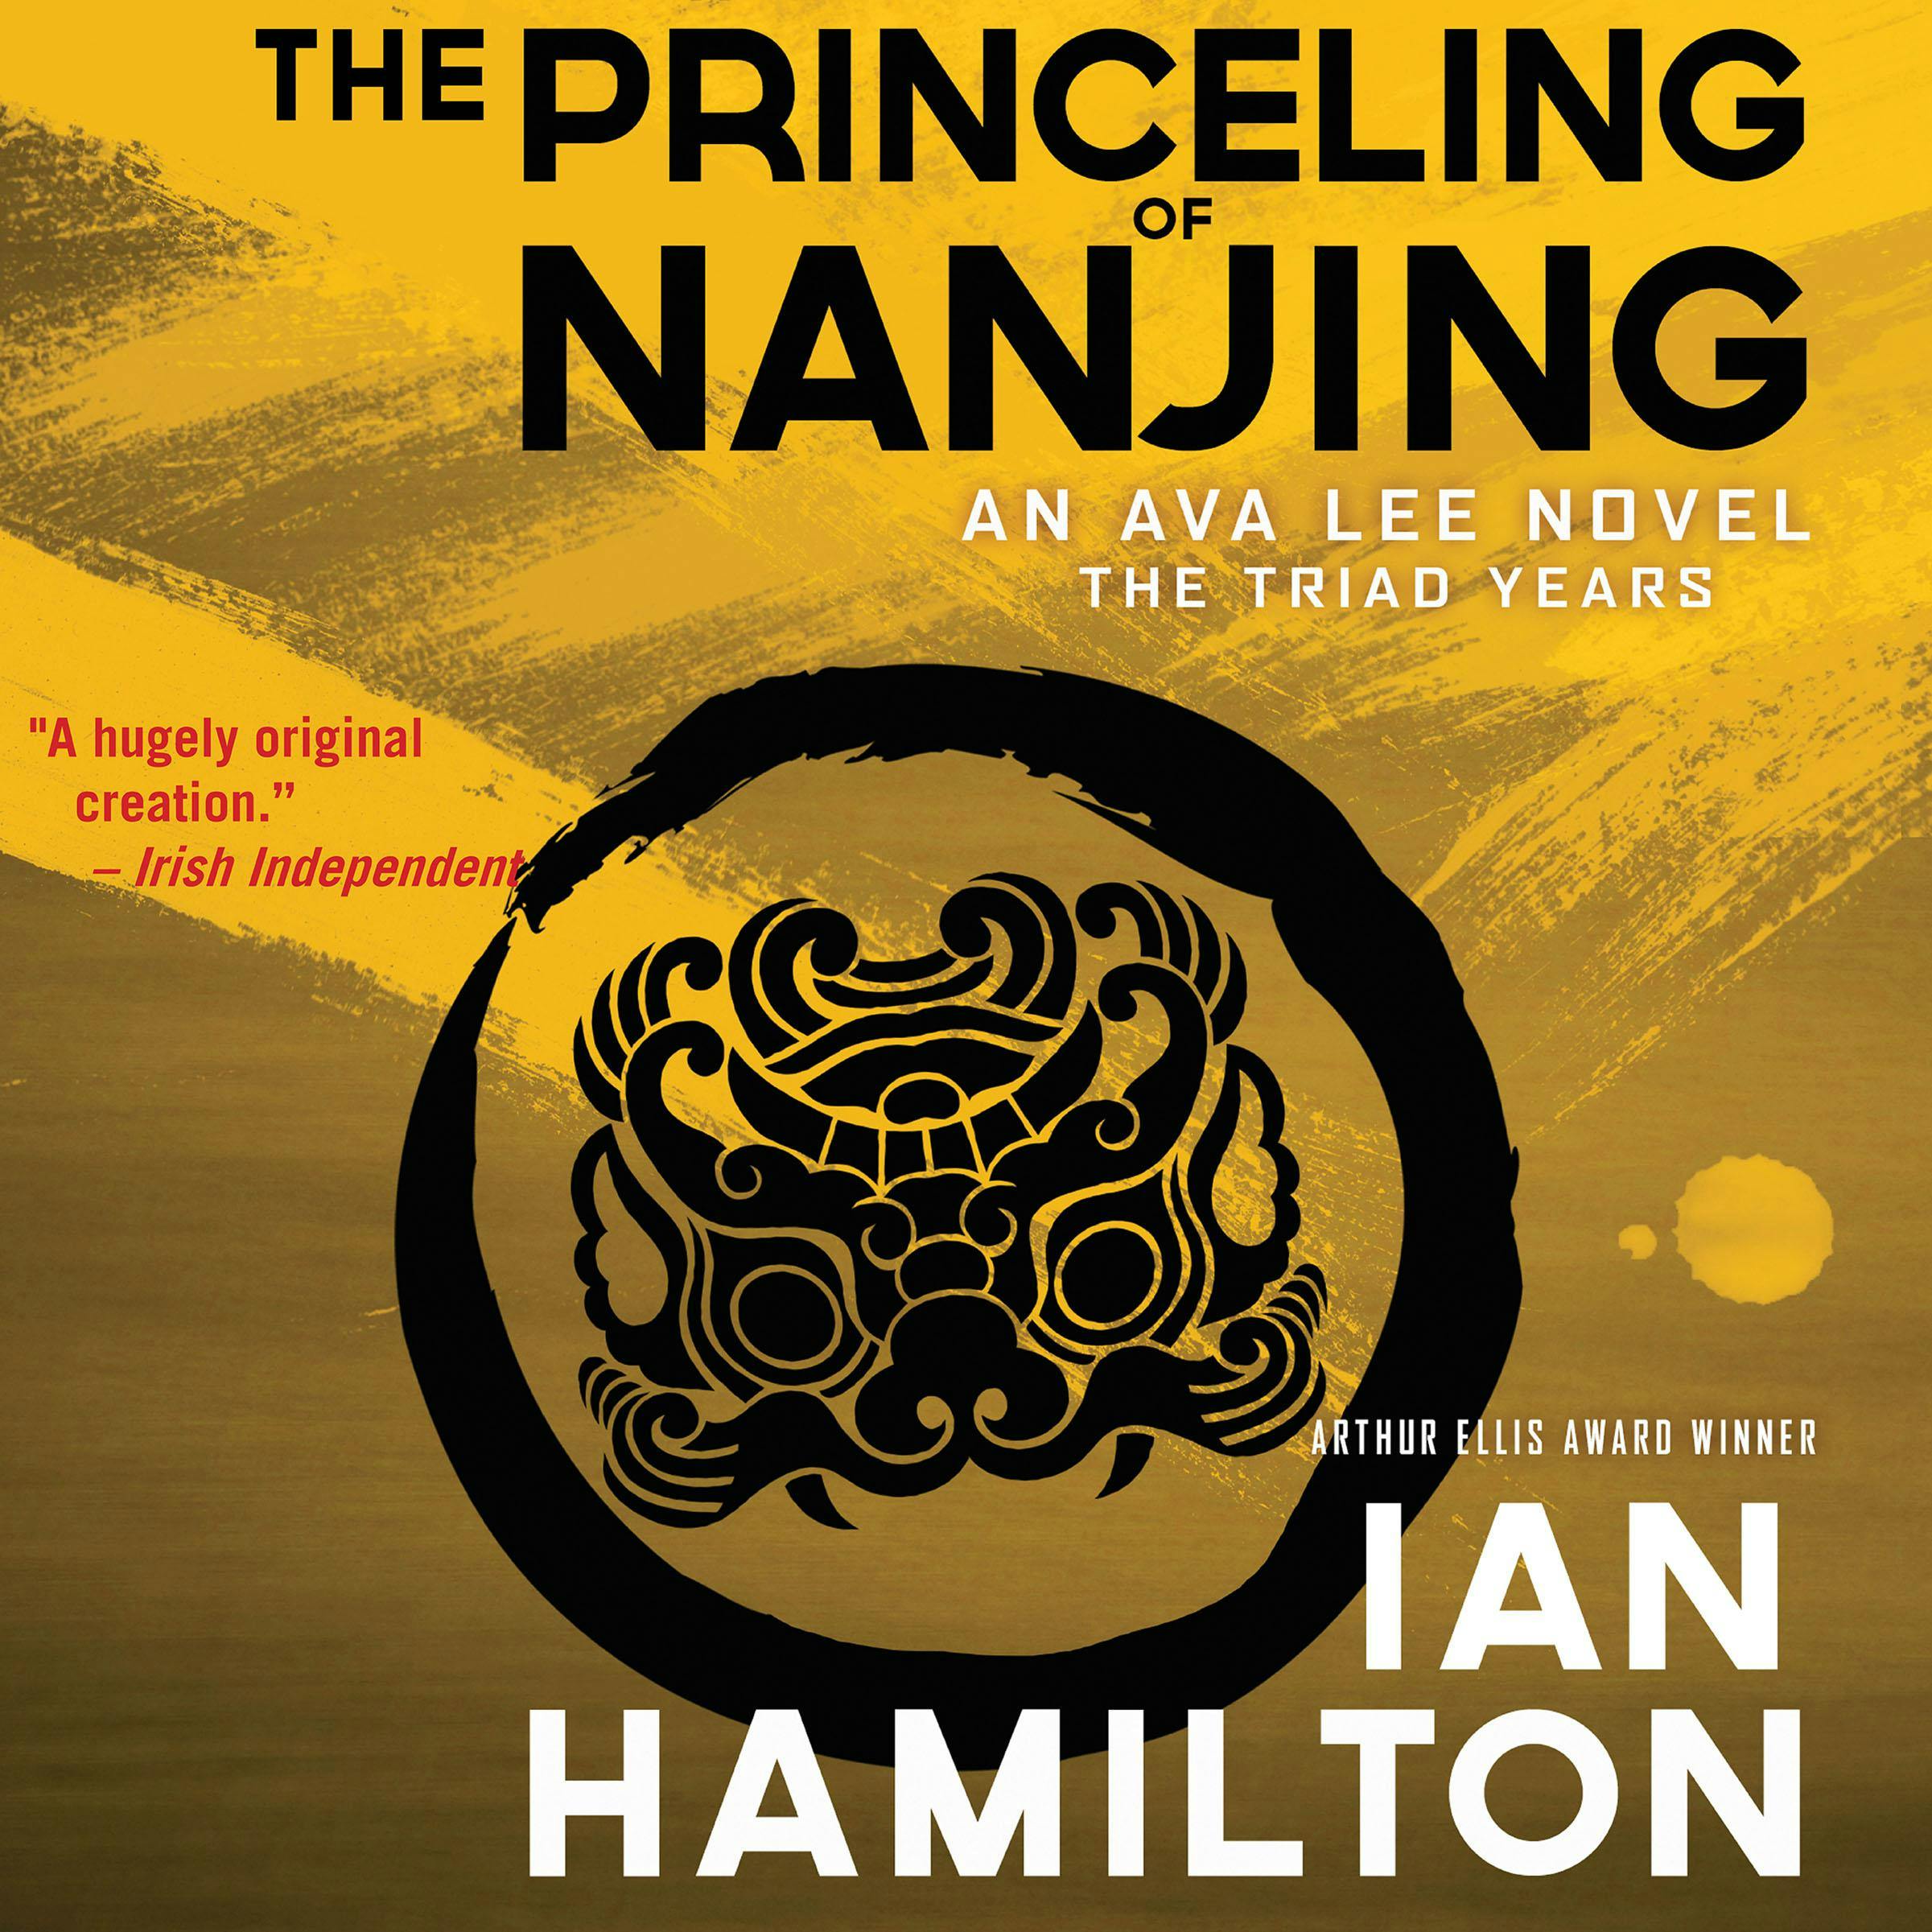 The Princeling of Nanjing: An Ava Lee Novel: The Triad Years - undefined